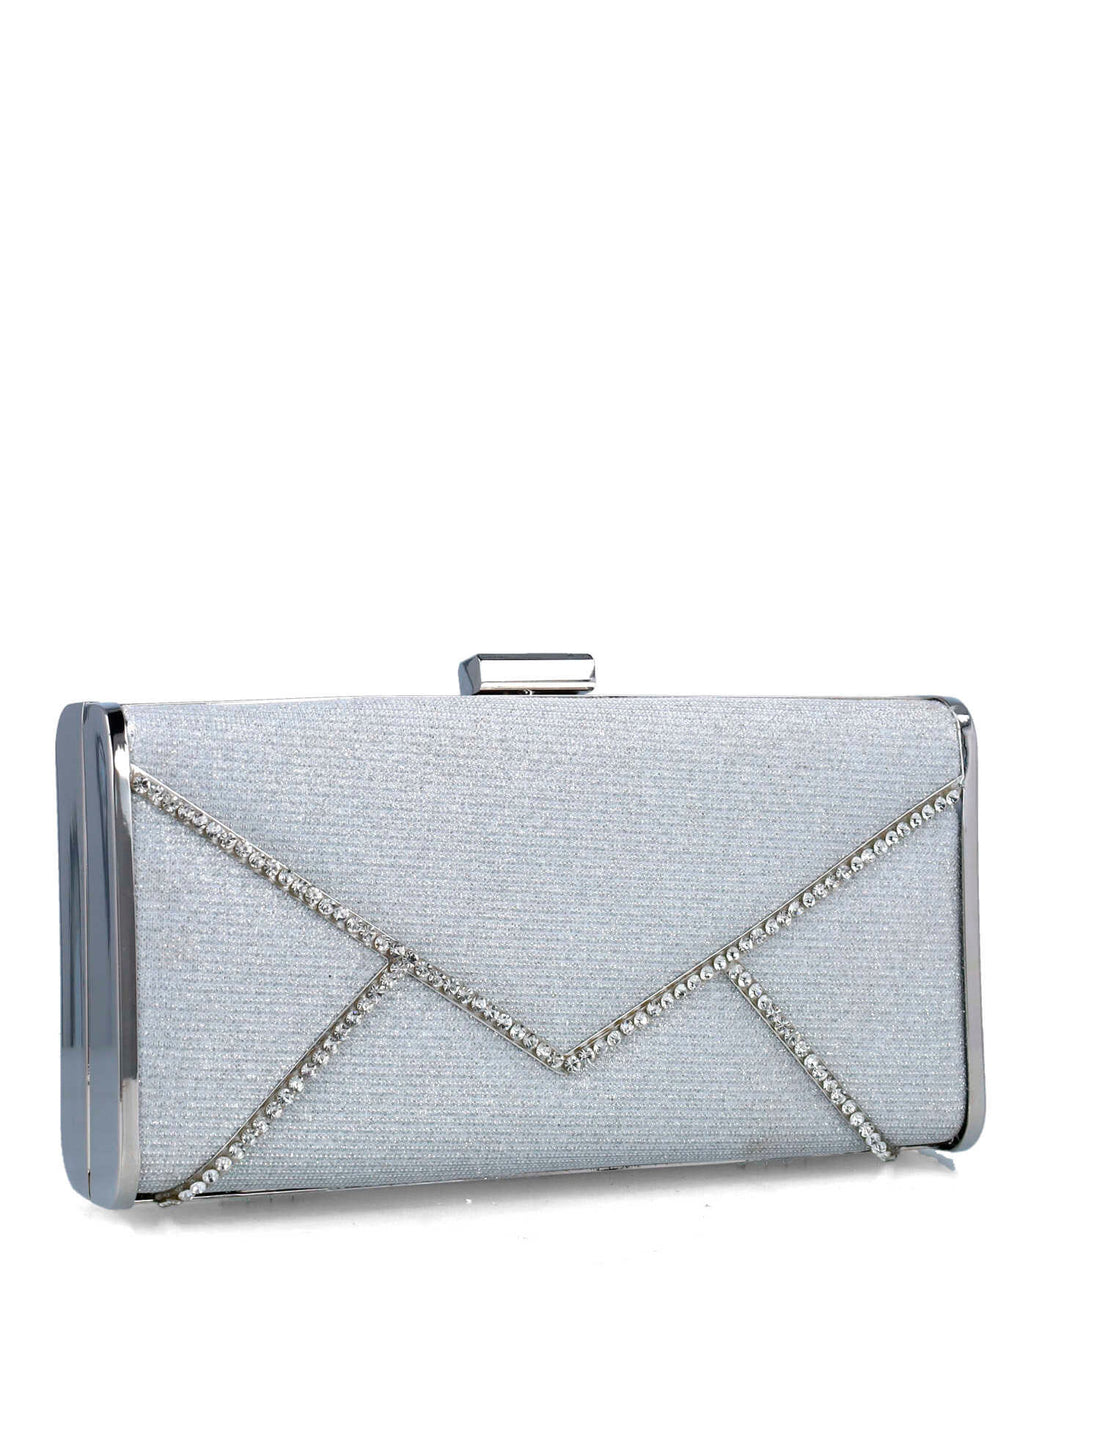 Silver Clutch With Silver Hardware_85656_09_02